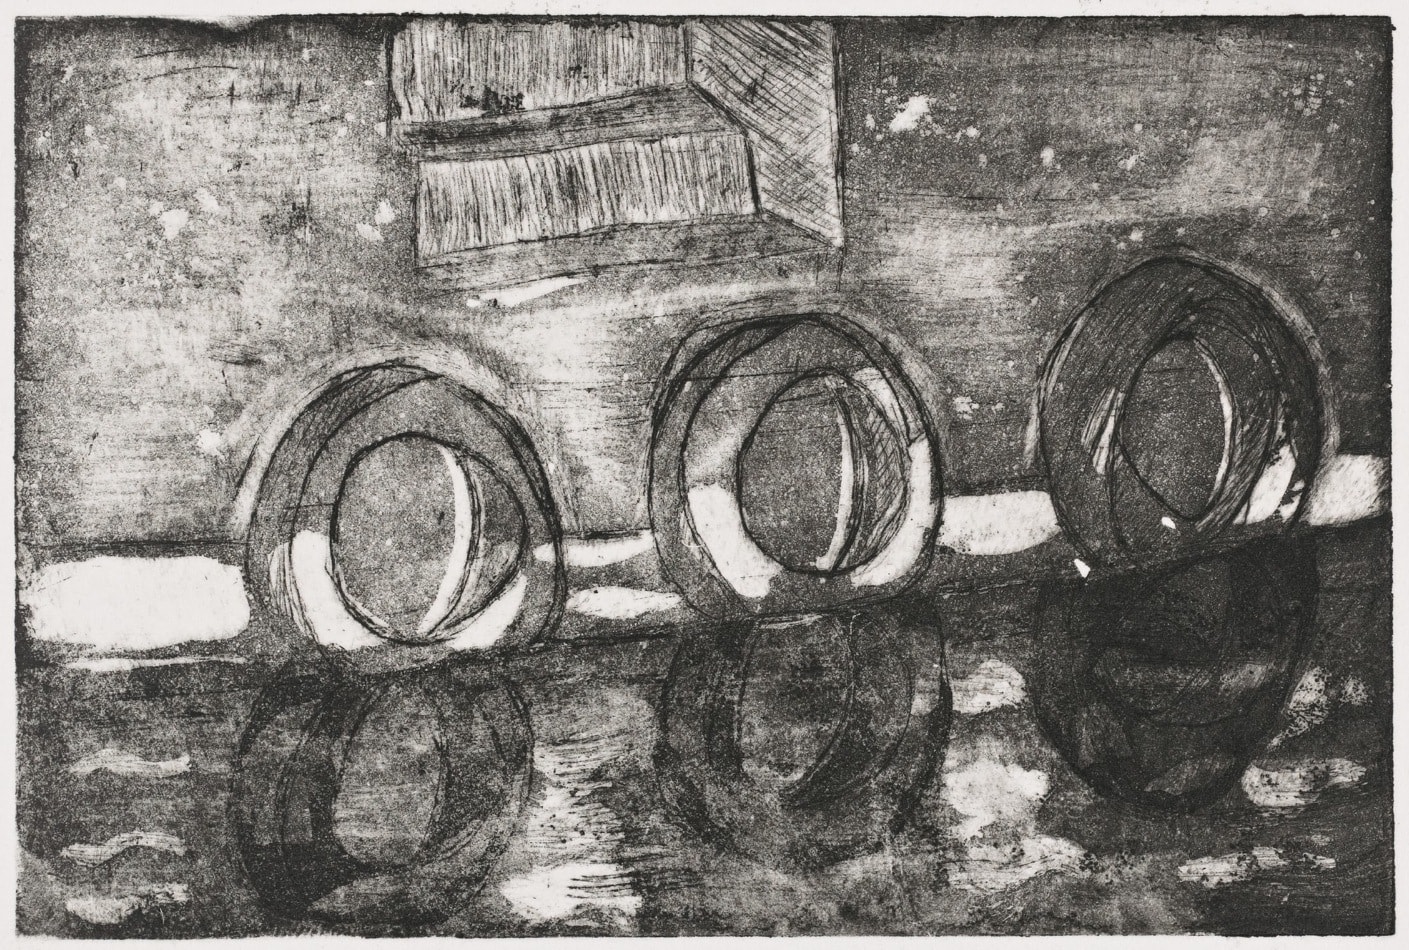 Print, etching and aquatint: Reflections of tires in water